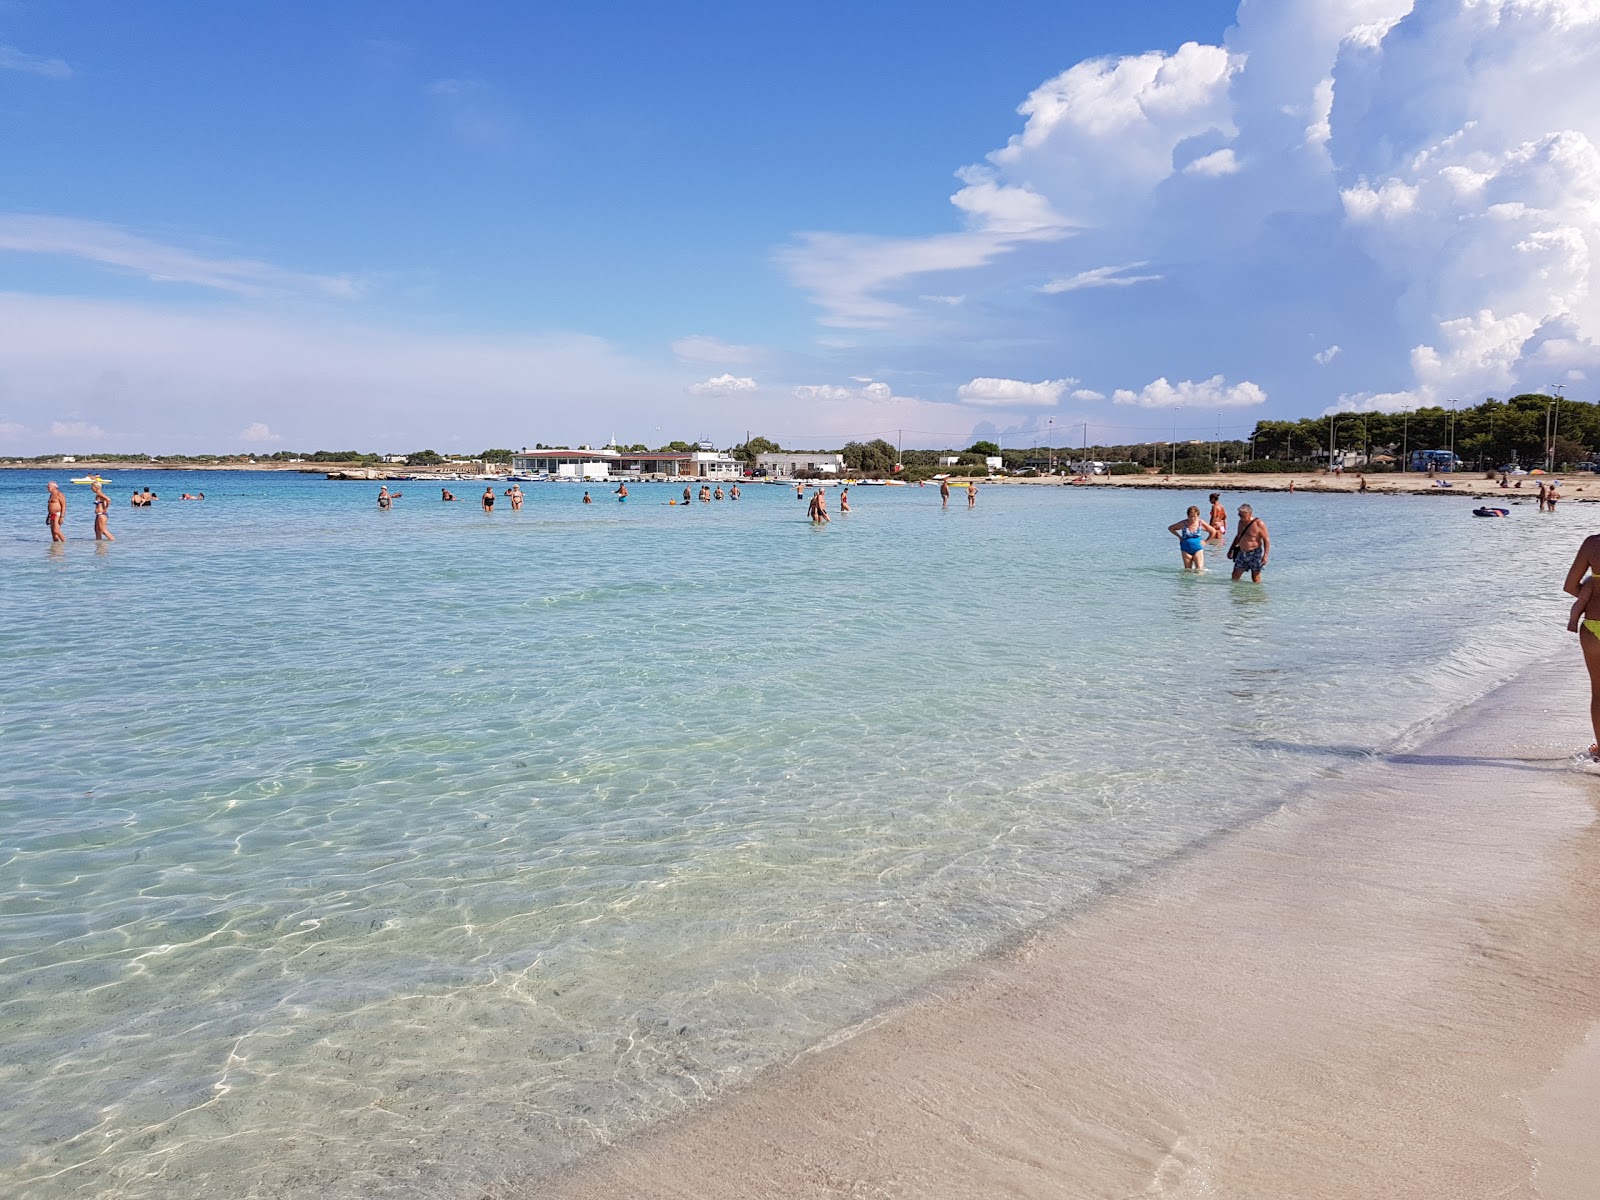 Foto af Spiaggia di Sant'Isidoro med lys fint sand overflade